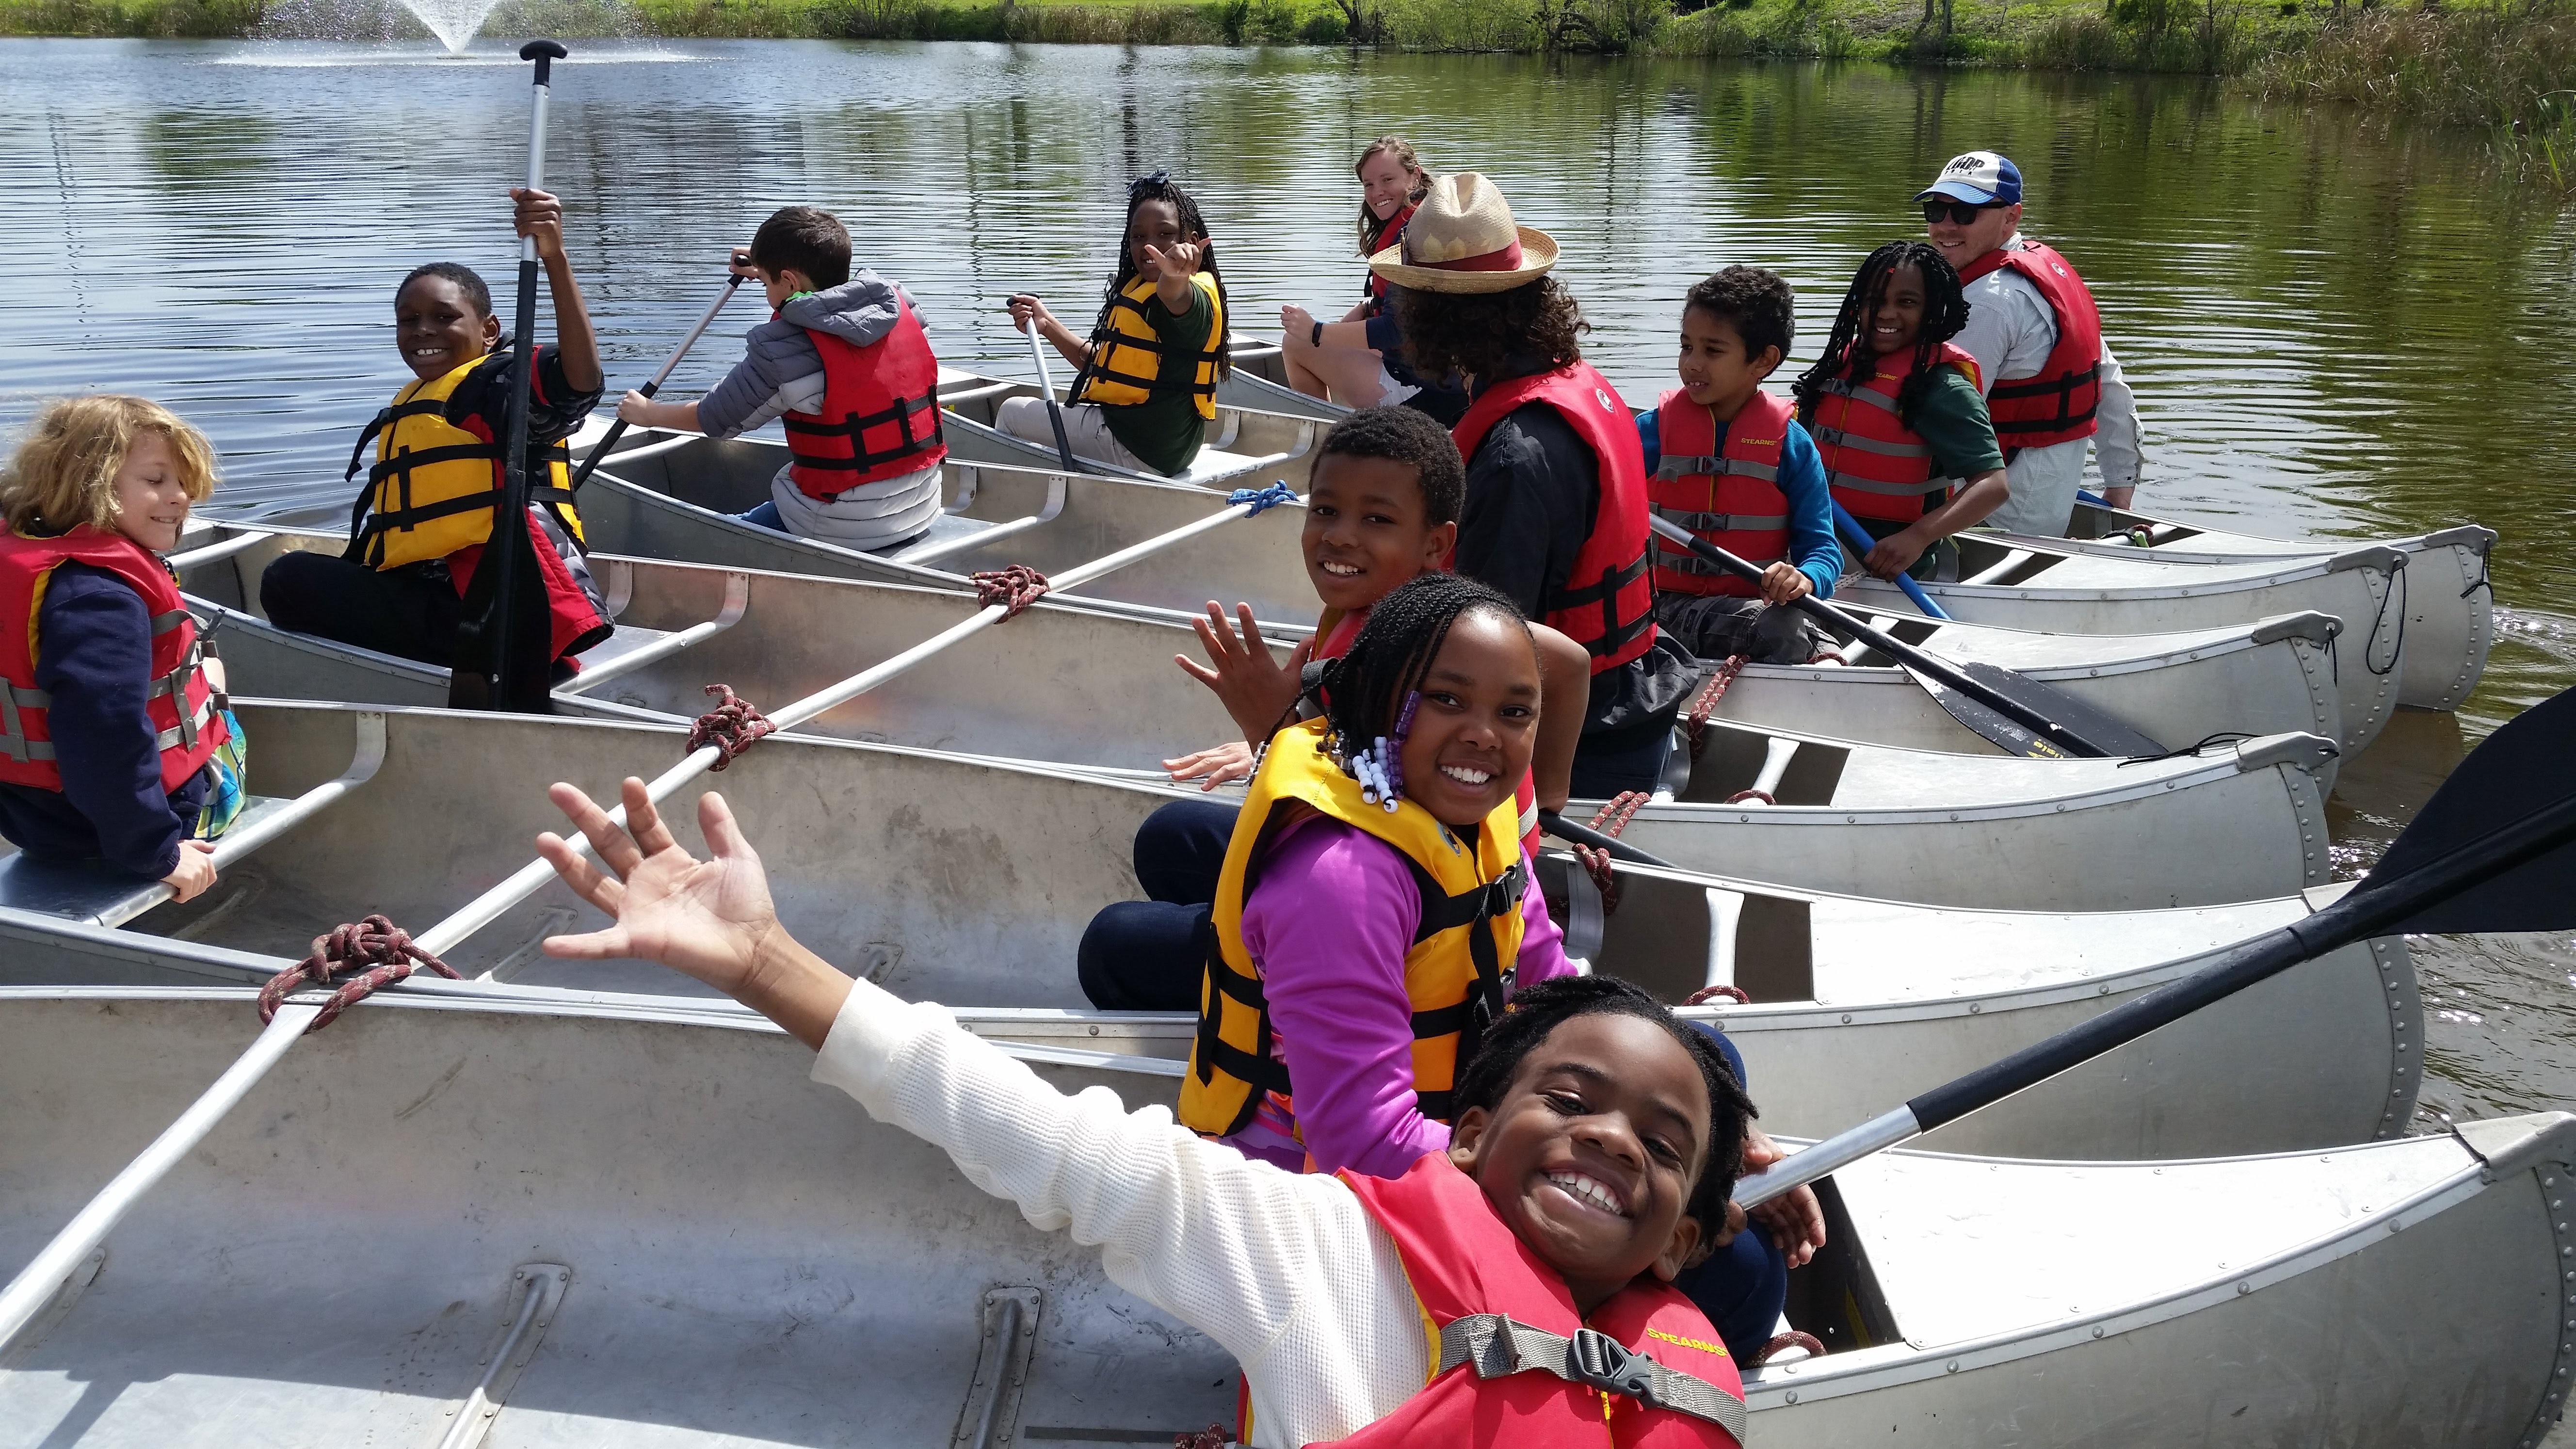 A group of kids wave and smile at the camera from canoes